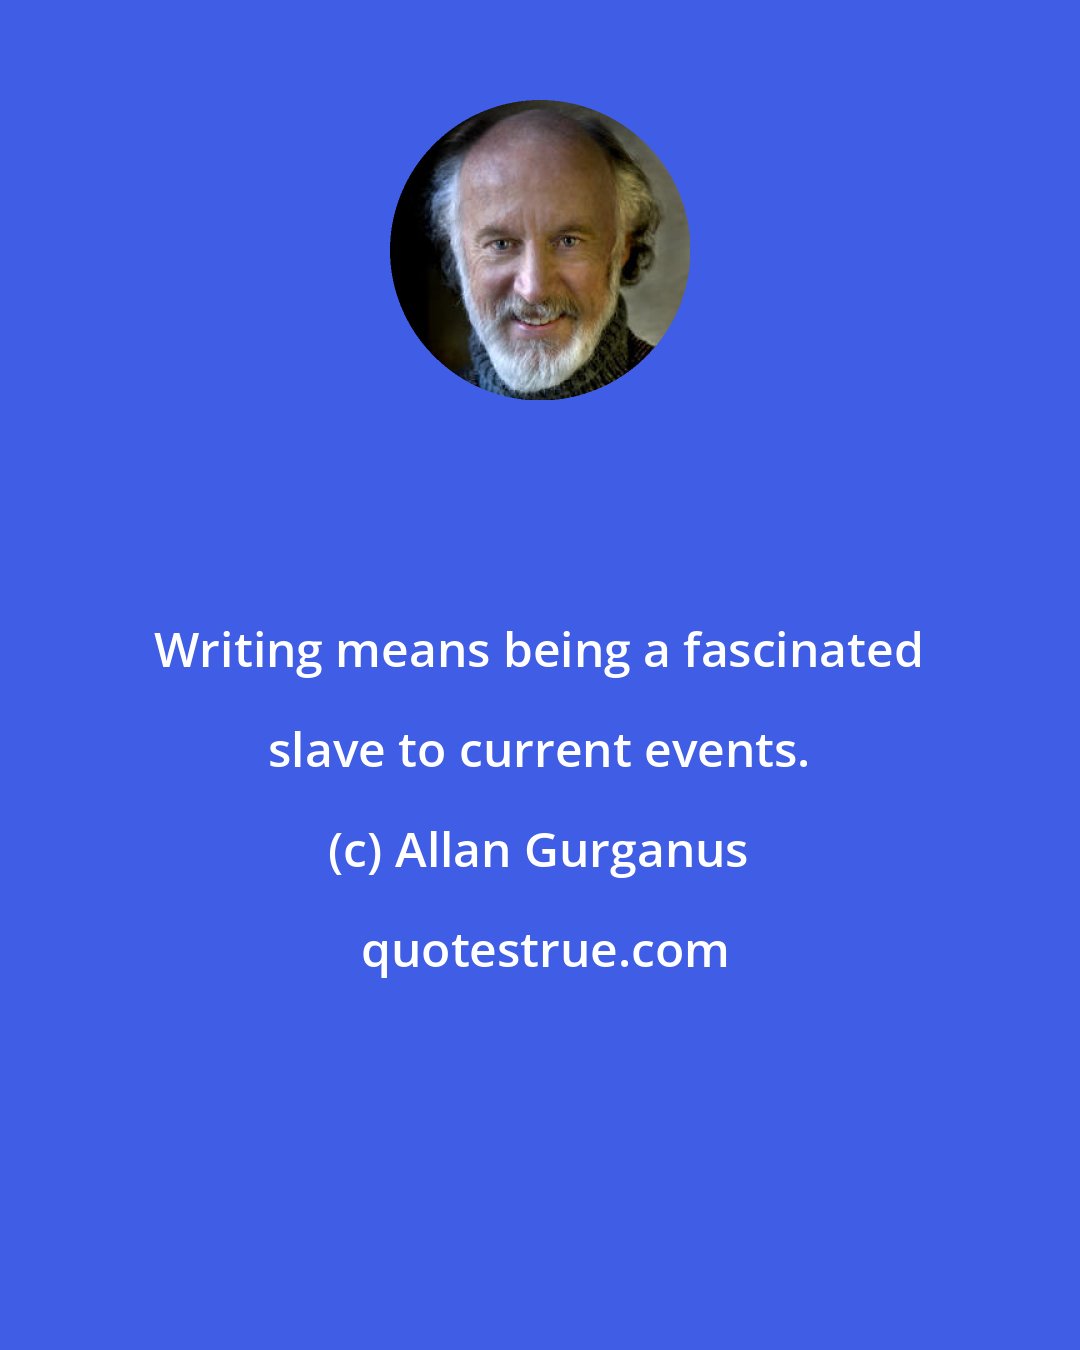 Allan Gurganus: Writing means being a fascinated slave to current events.